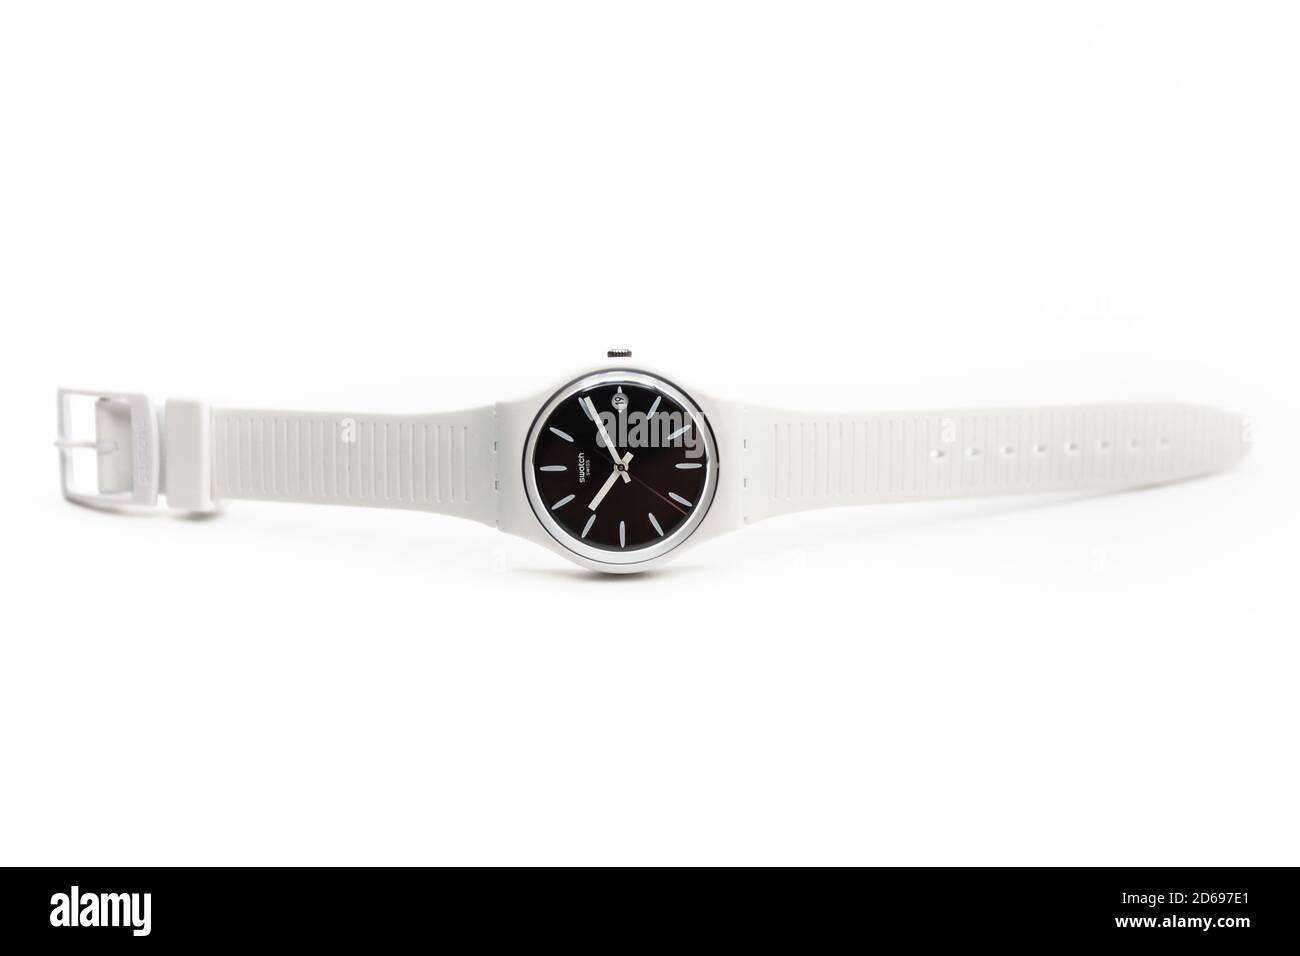 Swatch watch Cut Out Stock Images & Pictures - Alamy